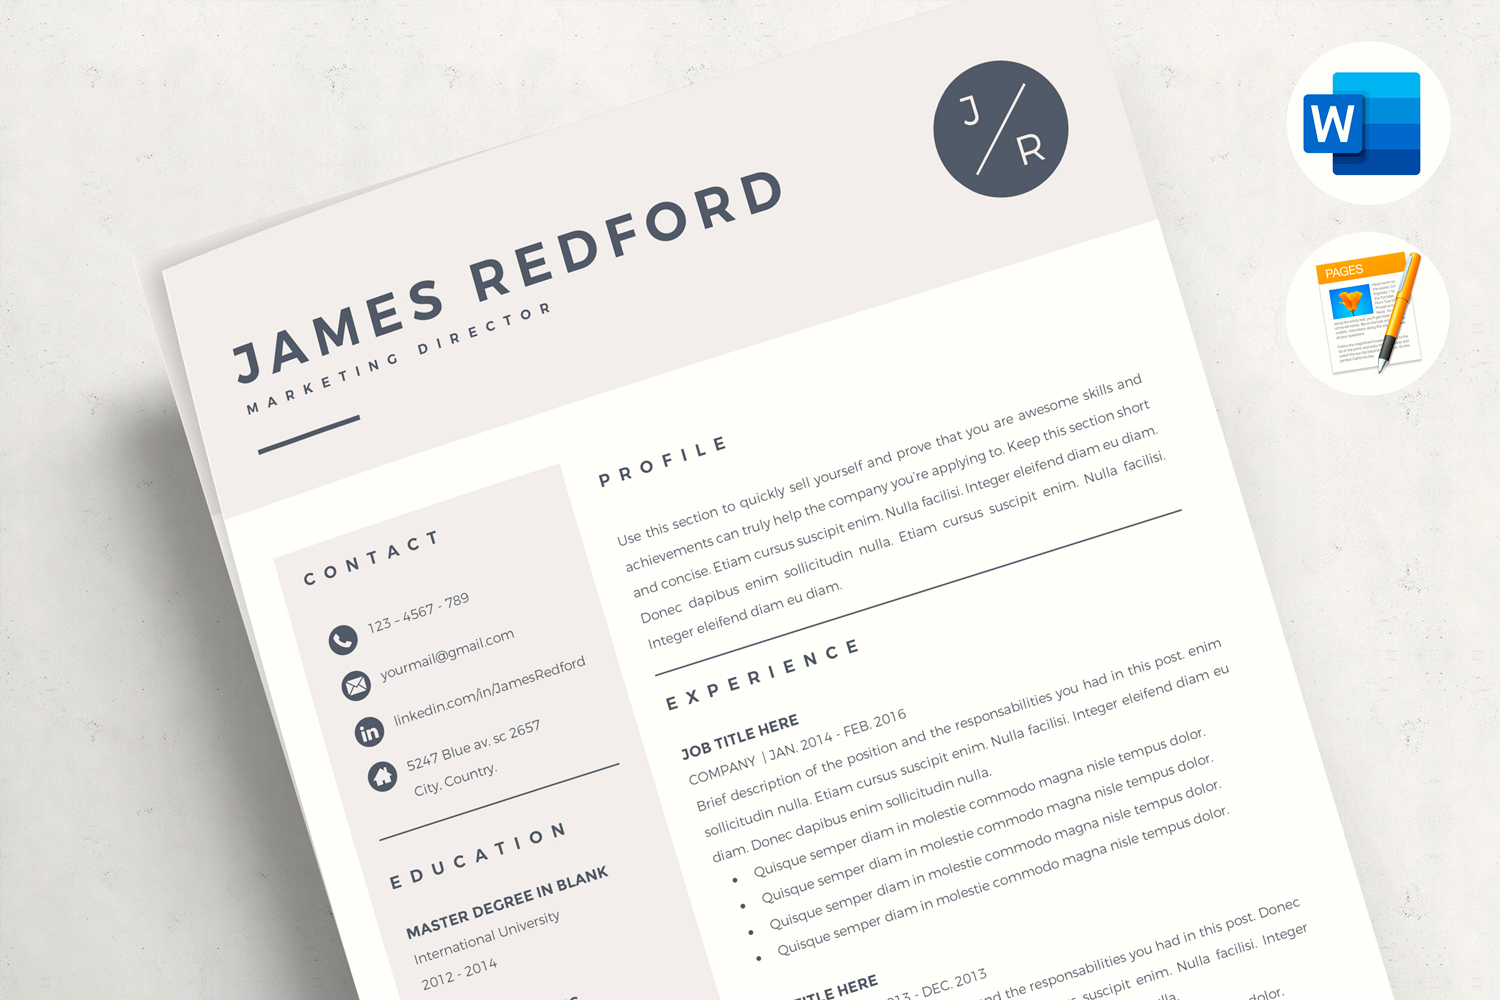 JAMES - Marketing Professional Resume Template CV With Logo for MS Word and Pages